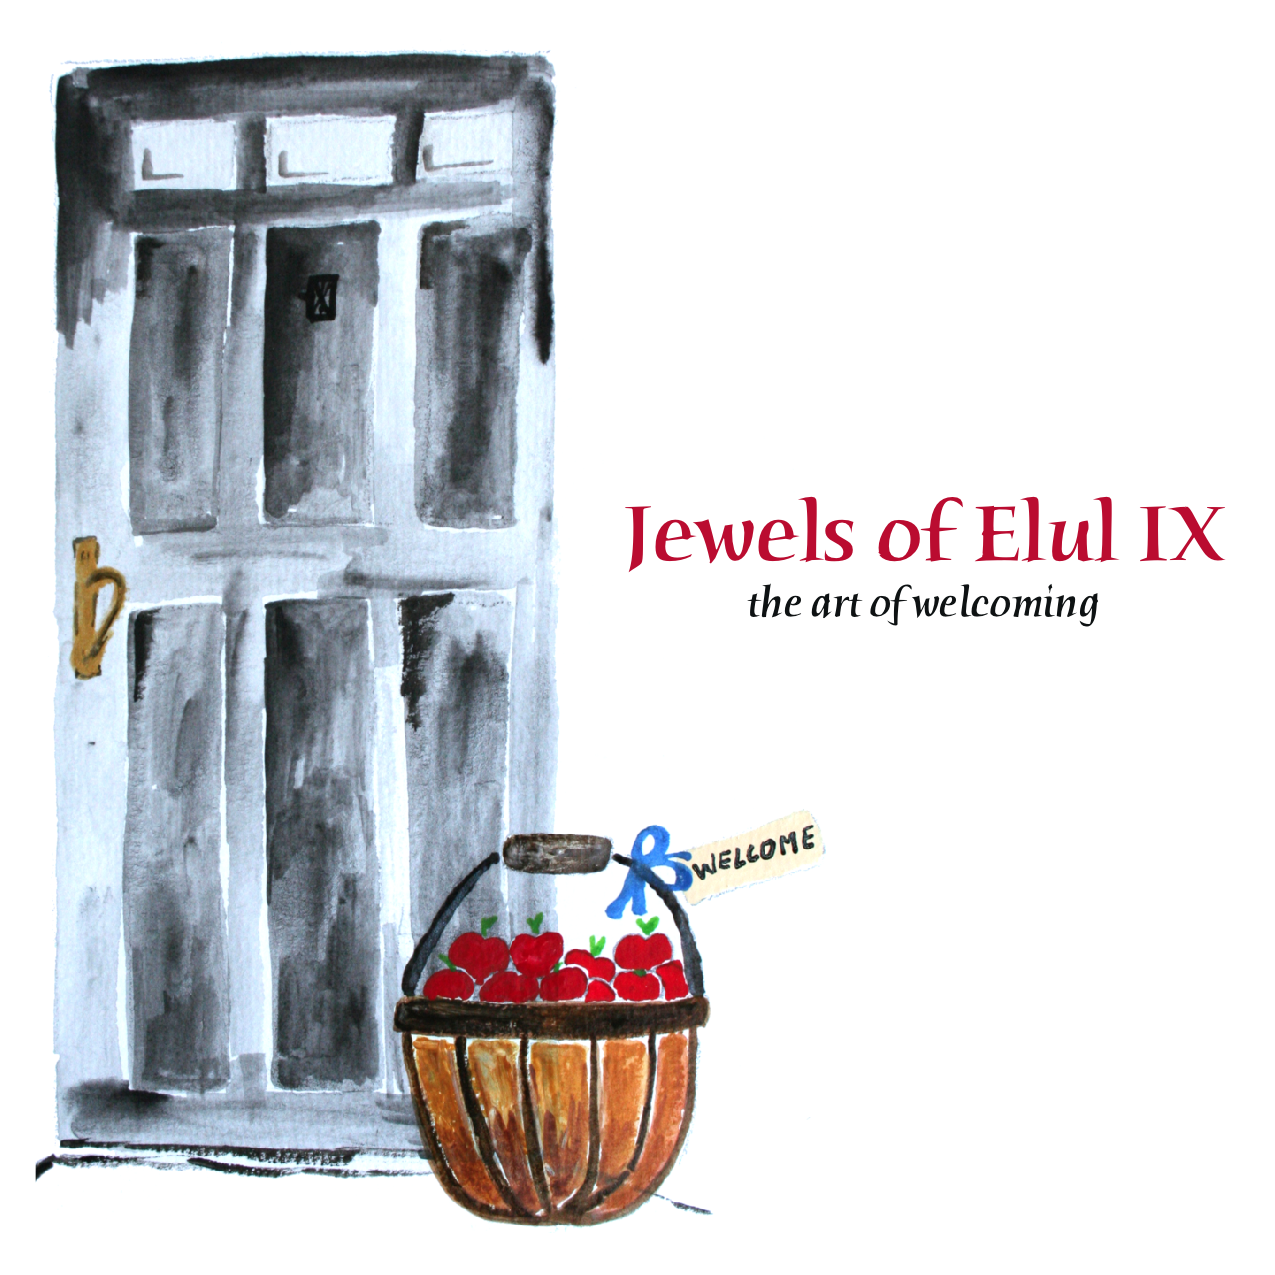 "Jewels of Elul: The Art of Welcoming"